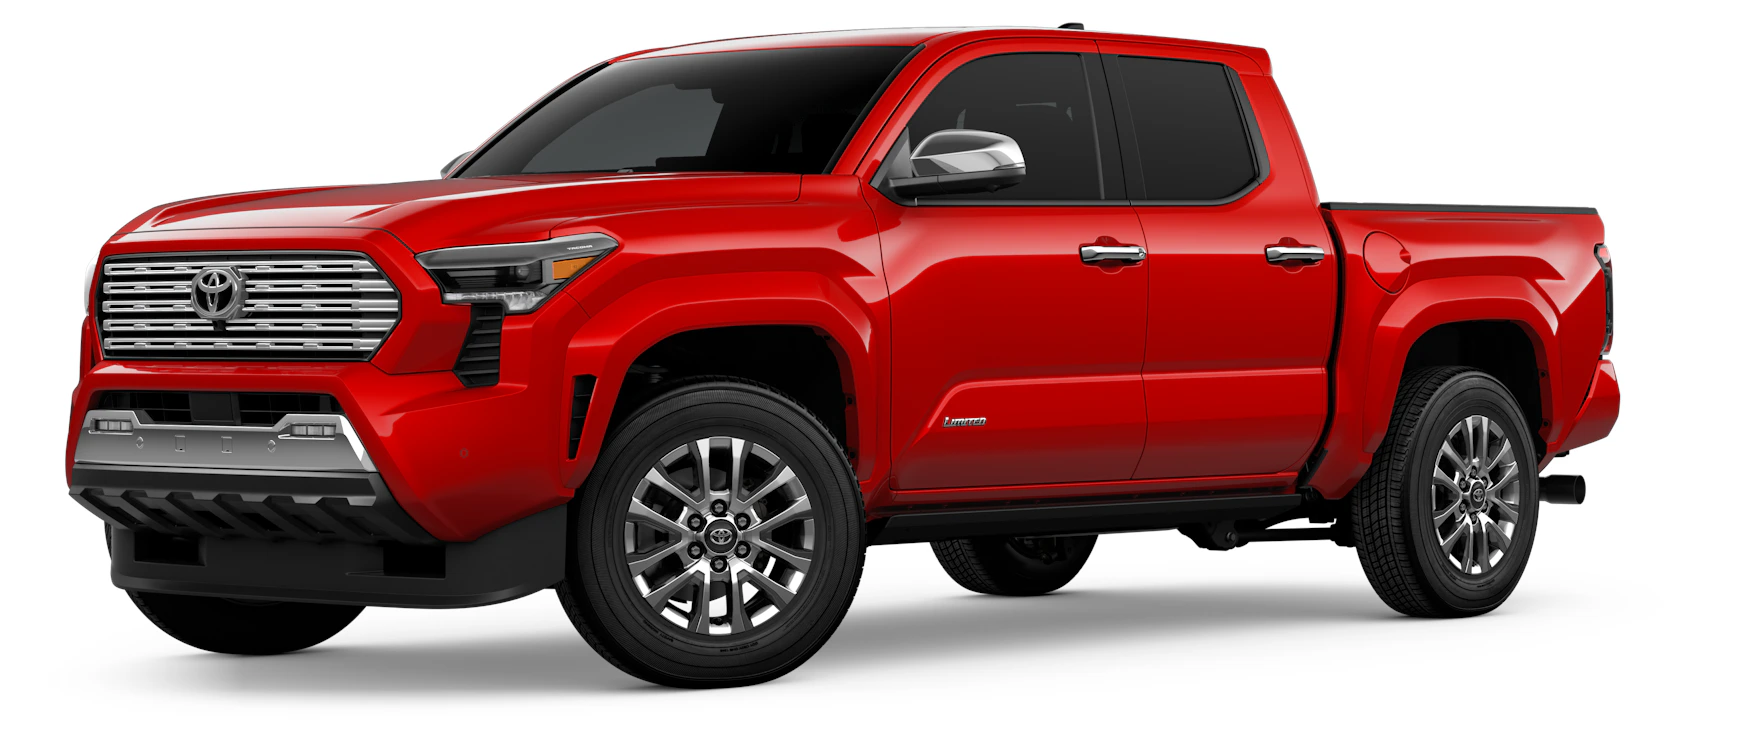 What Is the Top-Tier Trim of the Tacoma?